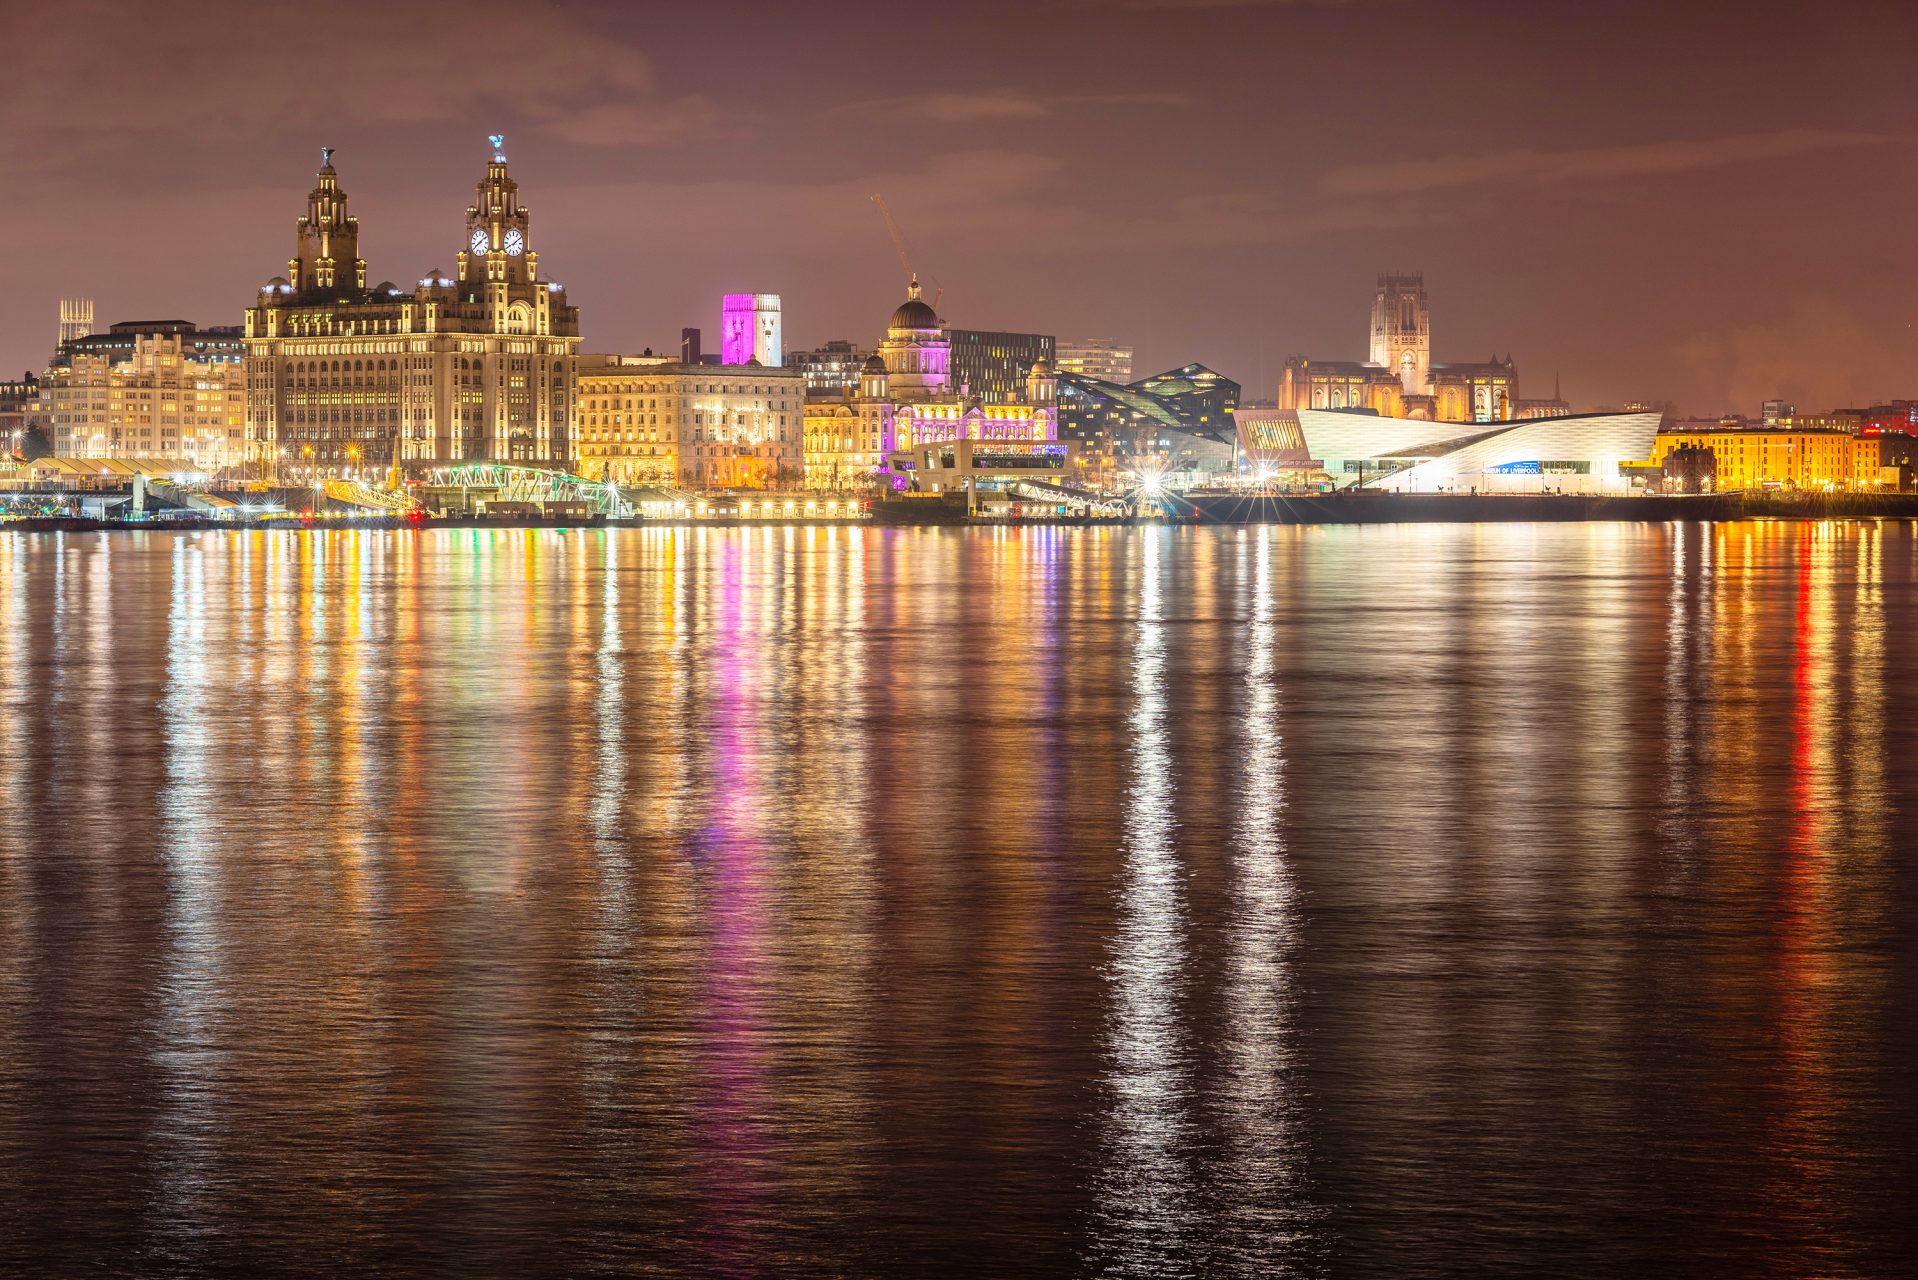 Liverpool Waterfront and River Mersey at night